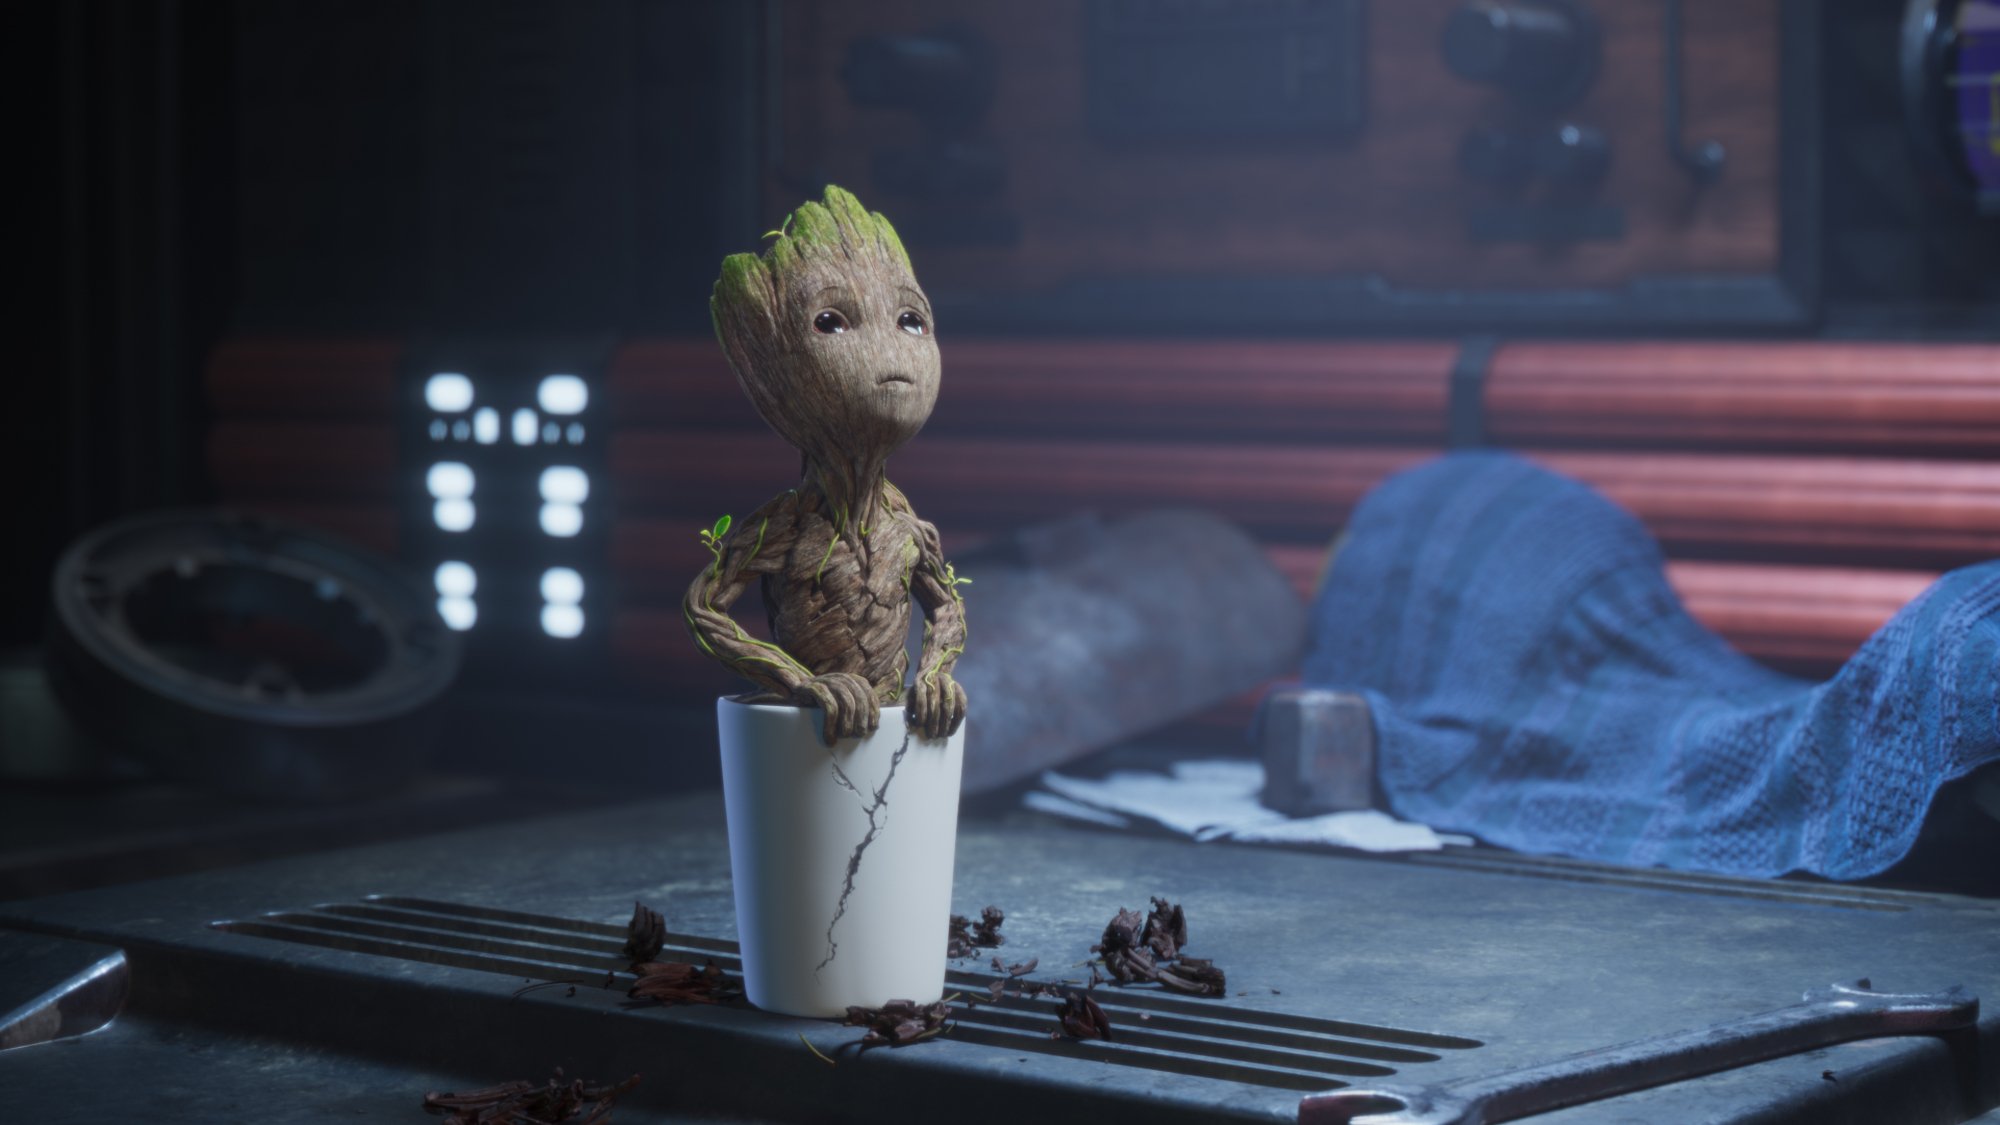 A screenshot from 'Groot's First Steps' for our ranking of Marvel's 'I Am Groot' shorts. In the image, Baby Groot is inside of his planter and looking up at something.